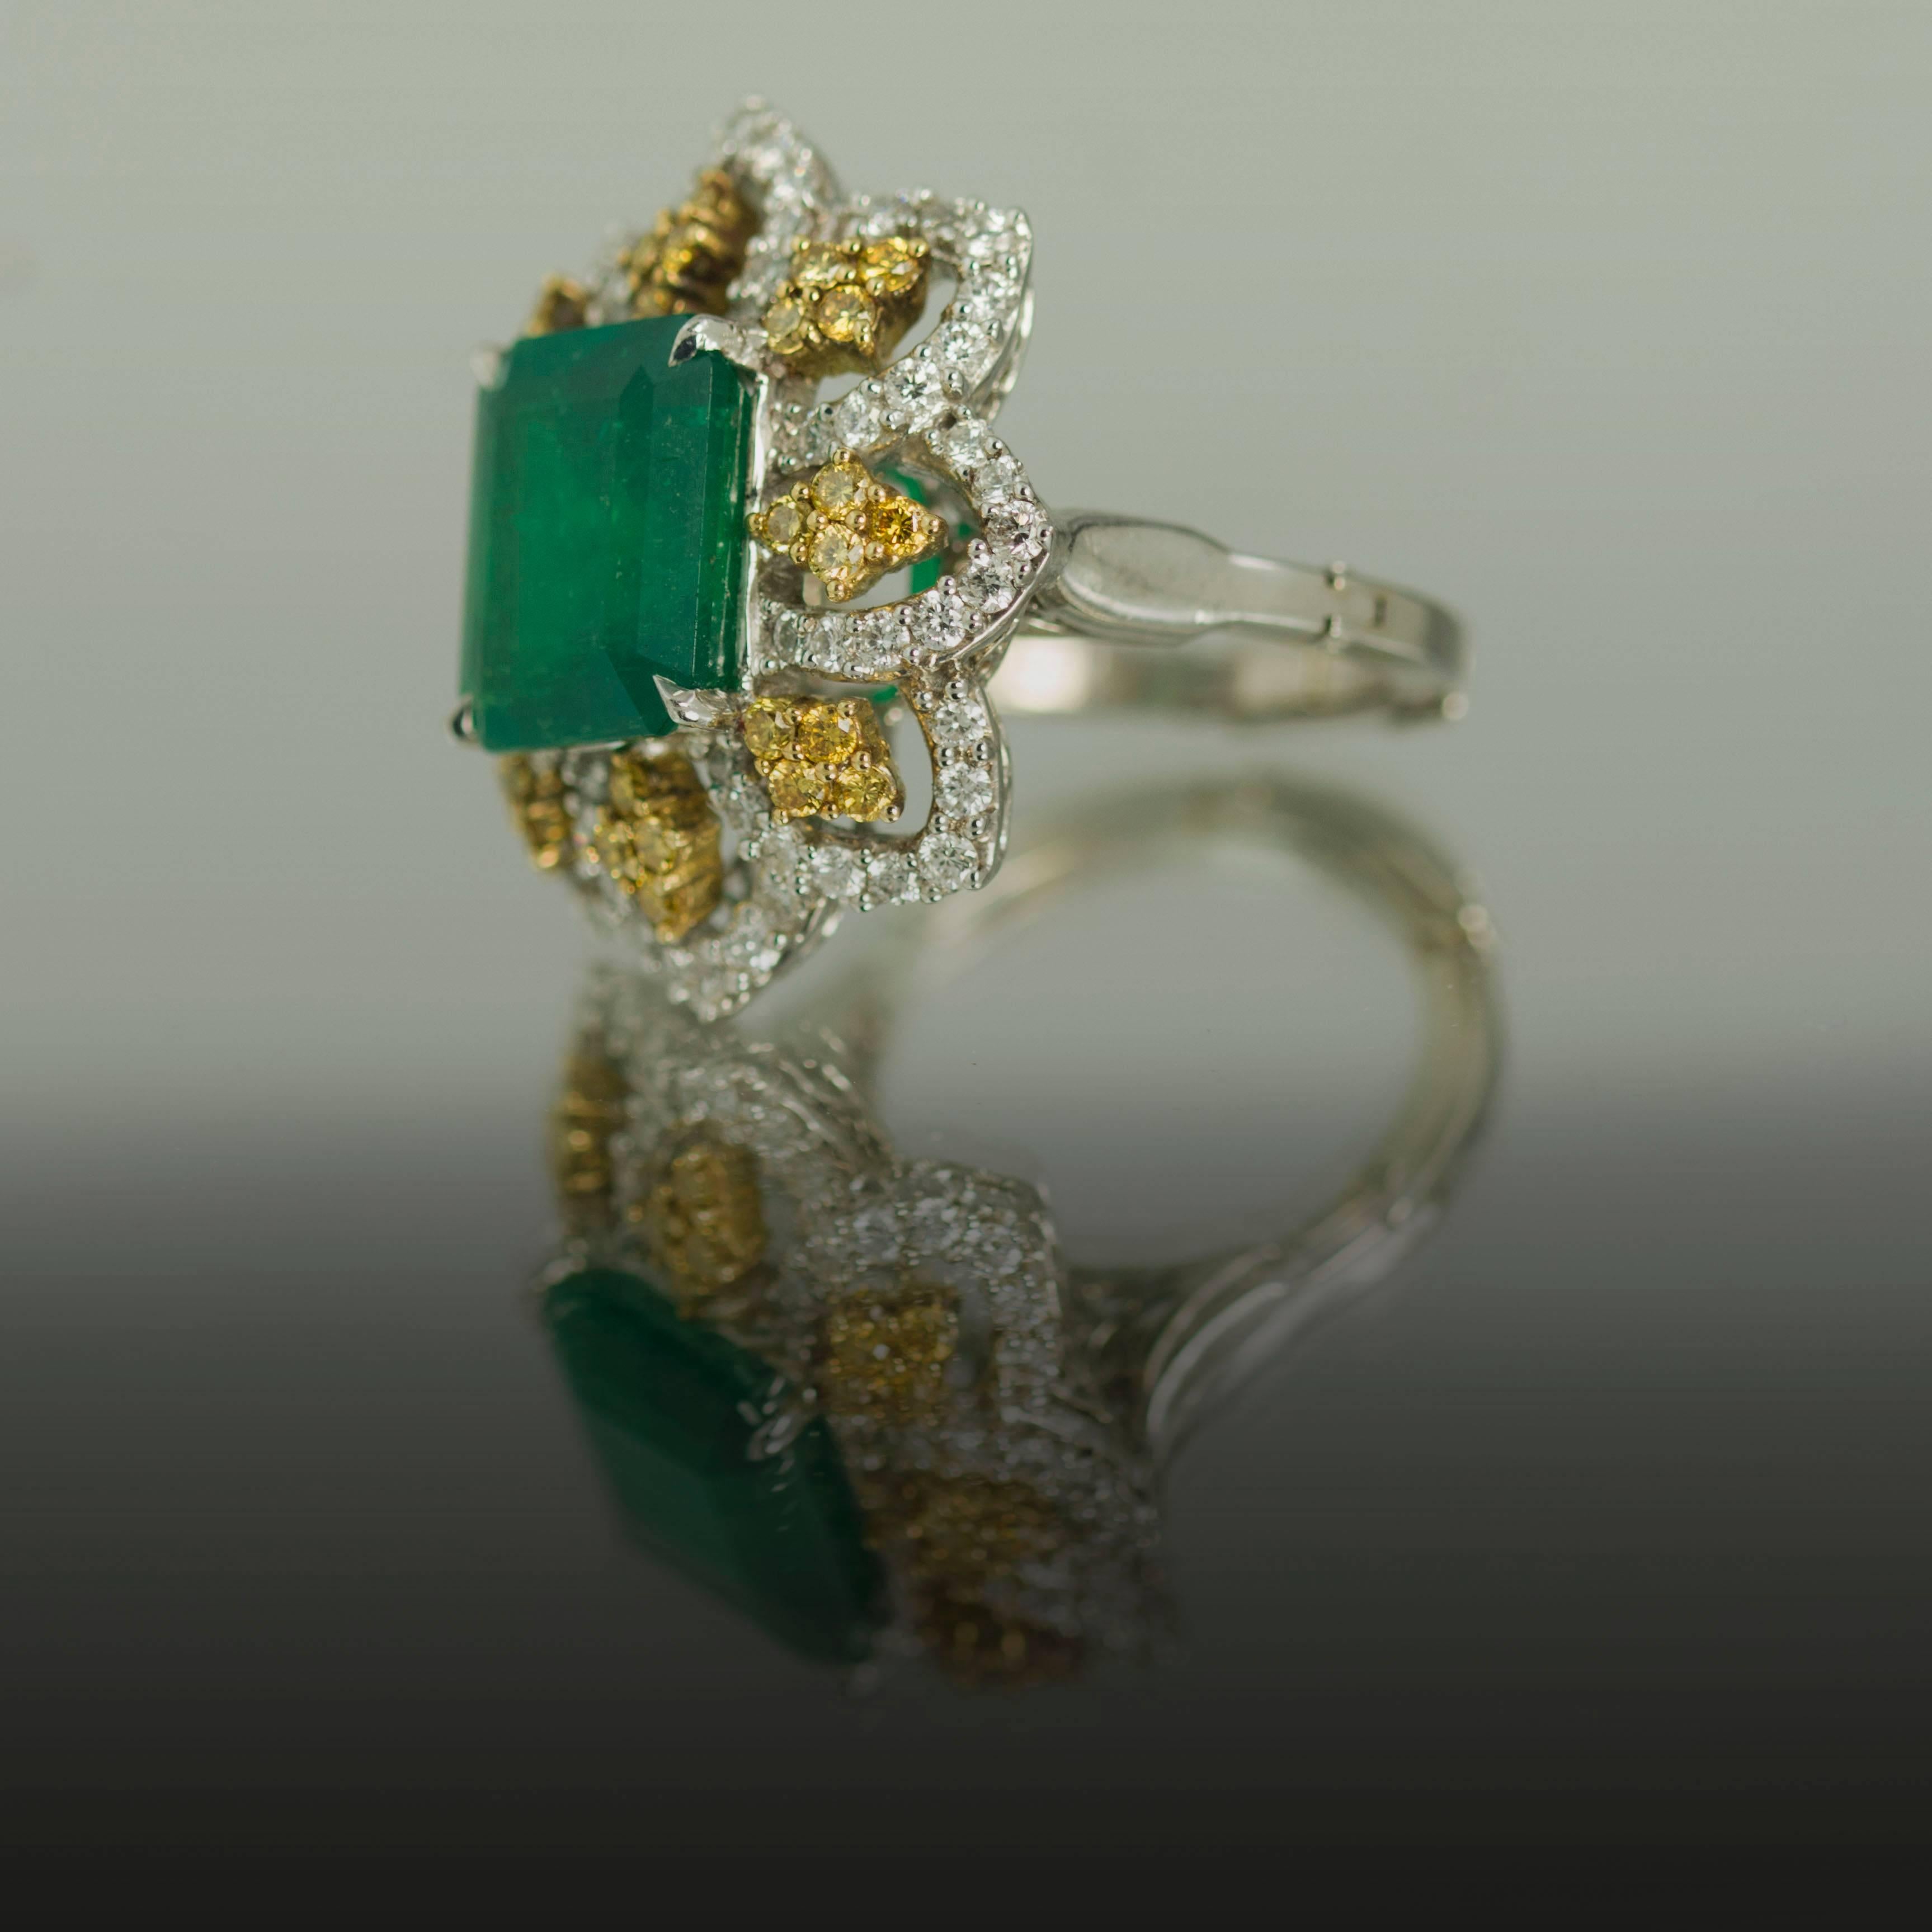 Platinum ring with 1 Colombian Emerald weighing 5.84 carats and 64 white round brilliant diamonds weighing 1.28 carats and 32 intense yellow round brilliant diamonds weighing 0.64 carats. Size 5 (Free Sizing)
 